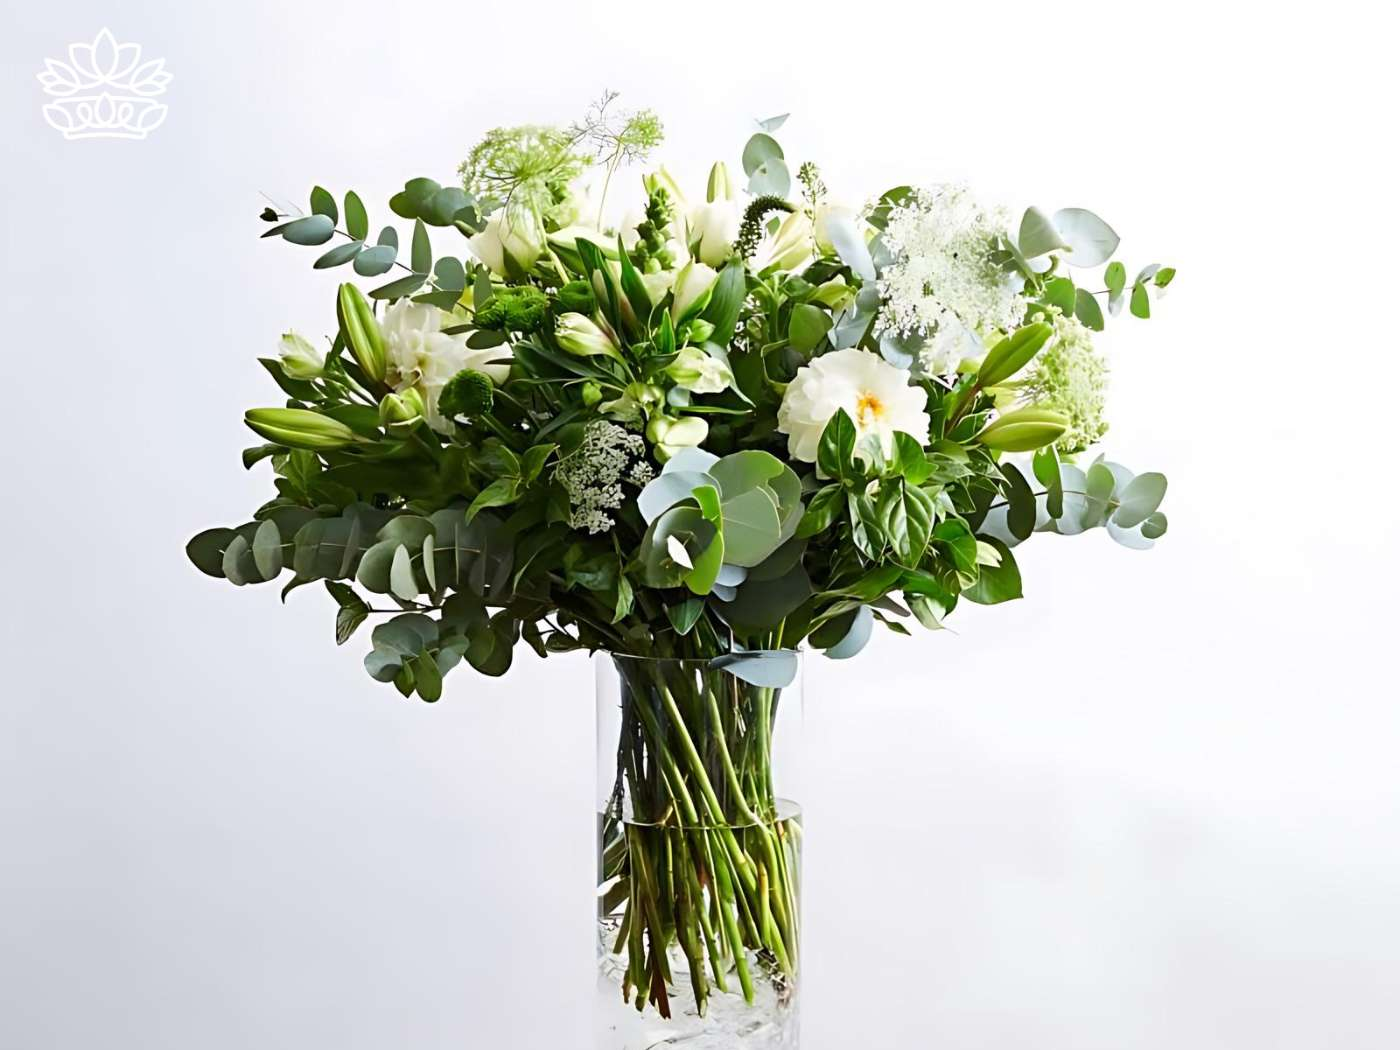 Elegant white floral arrangement in a glass vase featuring lilies, roses, and lush greenery, from Fabulous Flowers and Gifts.